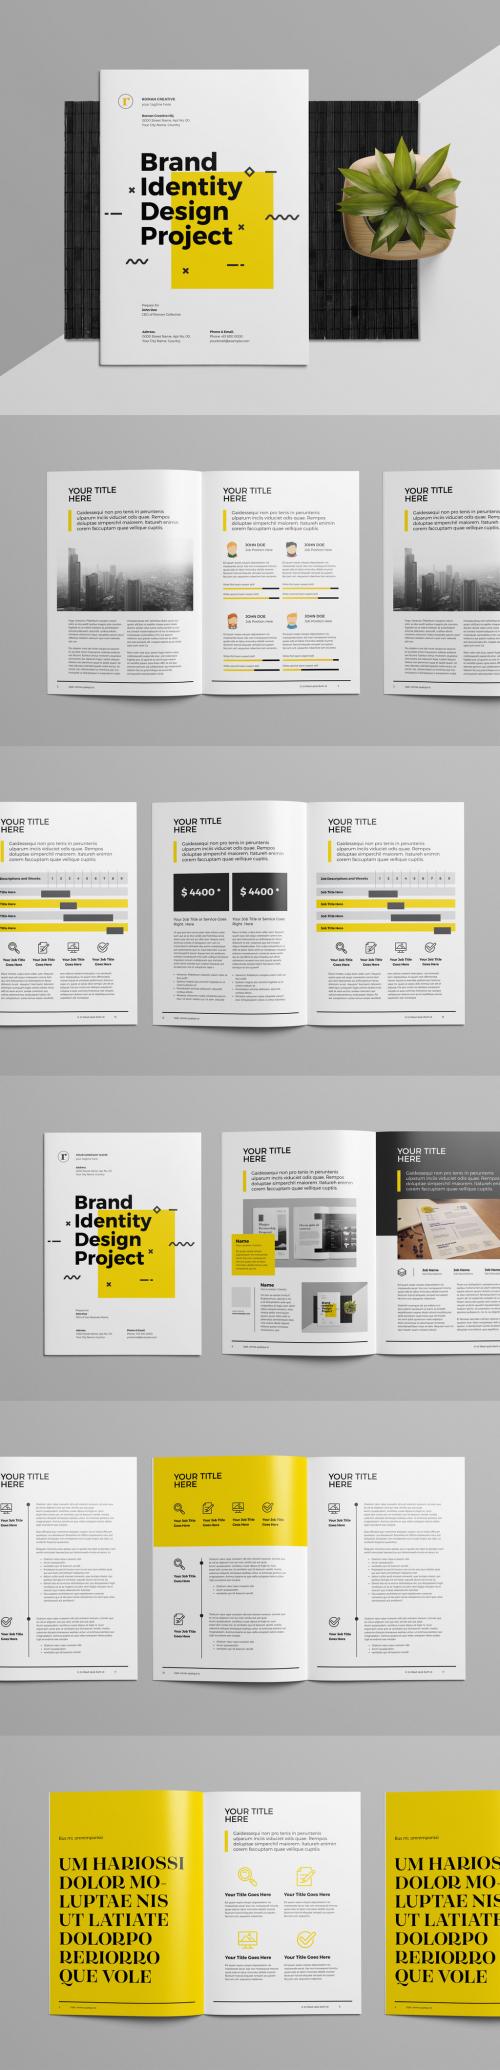 Adobe Stock - Brand Identity and Proposal Layout with Yellow Accents - 223606446